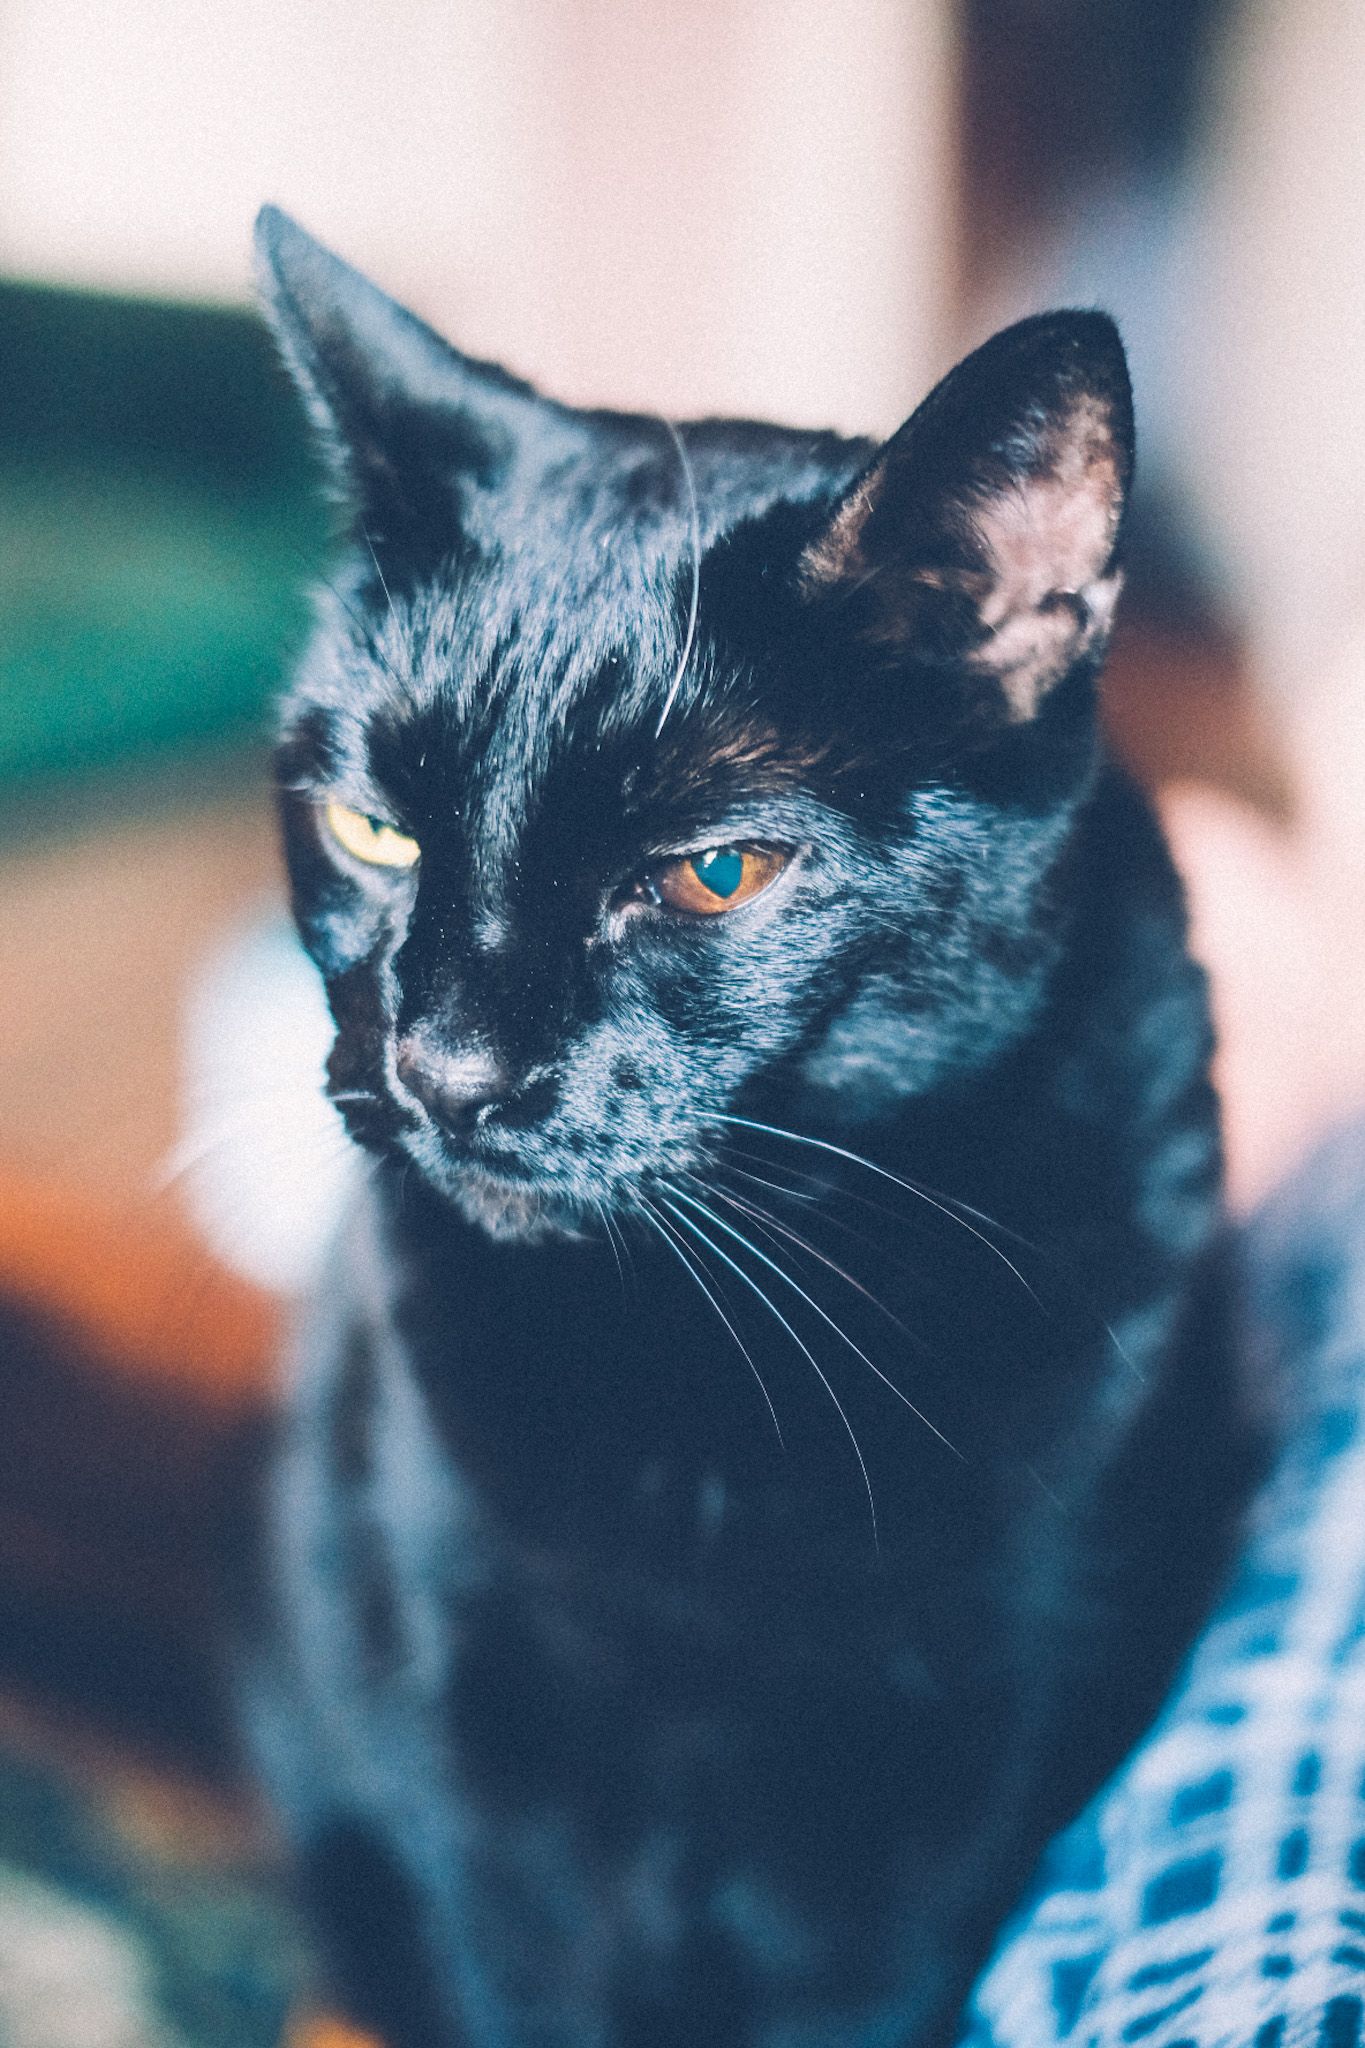 An up-close portrait of a black cat with one yellow eye and one brown eye, staring into the light.